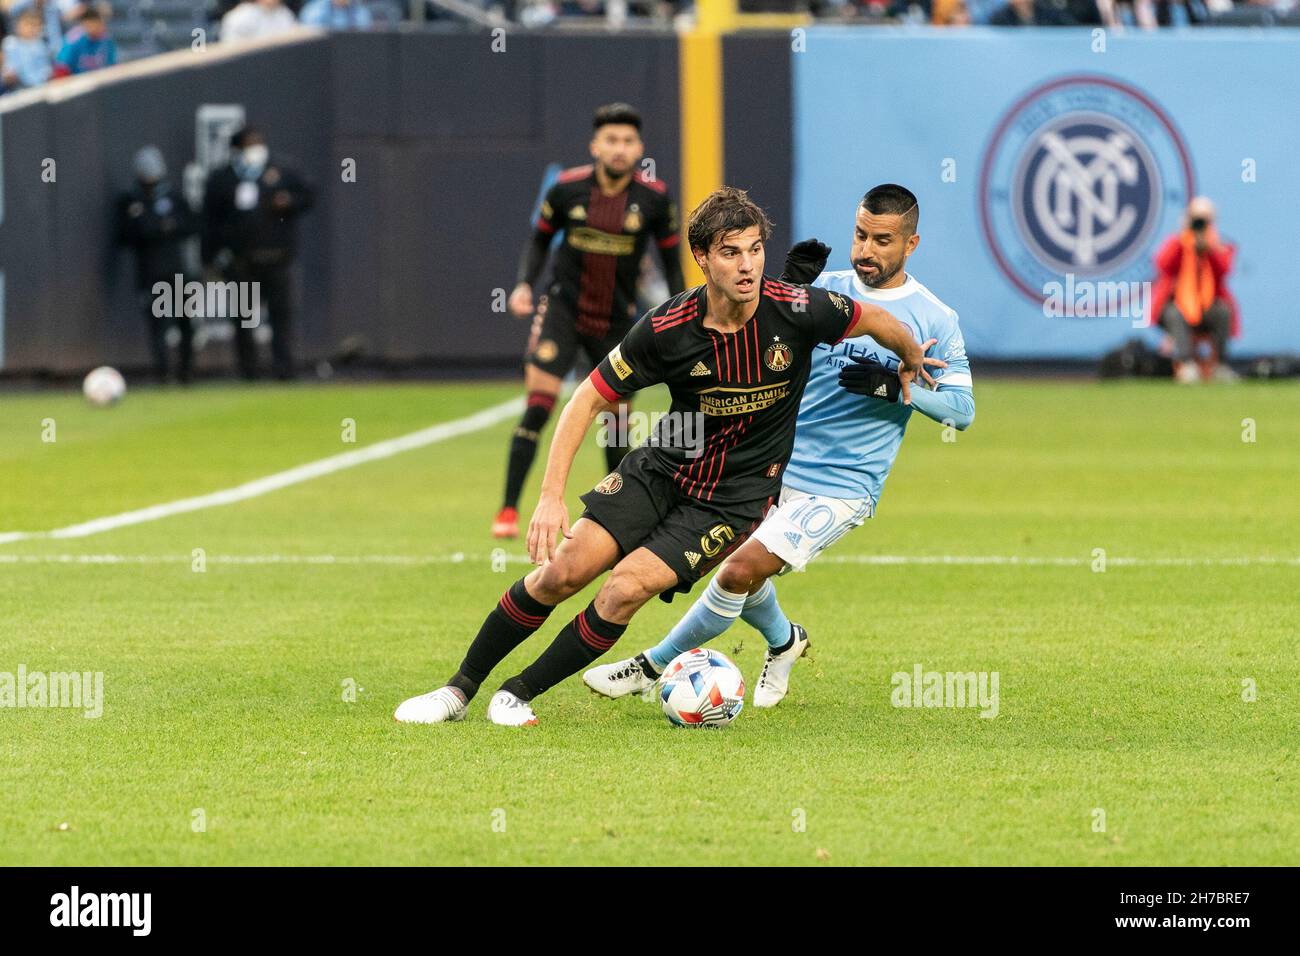 New York, United States. 21st Nov, 2021. Maximiliano Moralez (10) of NYCFC and Santiago Sosa (5) of Atlanta United fight for the ball during first round game of MLS Cup on Yankee stadium. NYCFC won 2 - 0 and progressed to semifinal of MLS Cup. They will play New England Revolution for the place in Eastern Conference final. (Photo by Lev Radin/Pacific Press) Credit: Pacific Press Media Production Corp./Alamy Live News Stock Photo